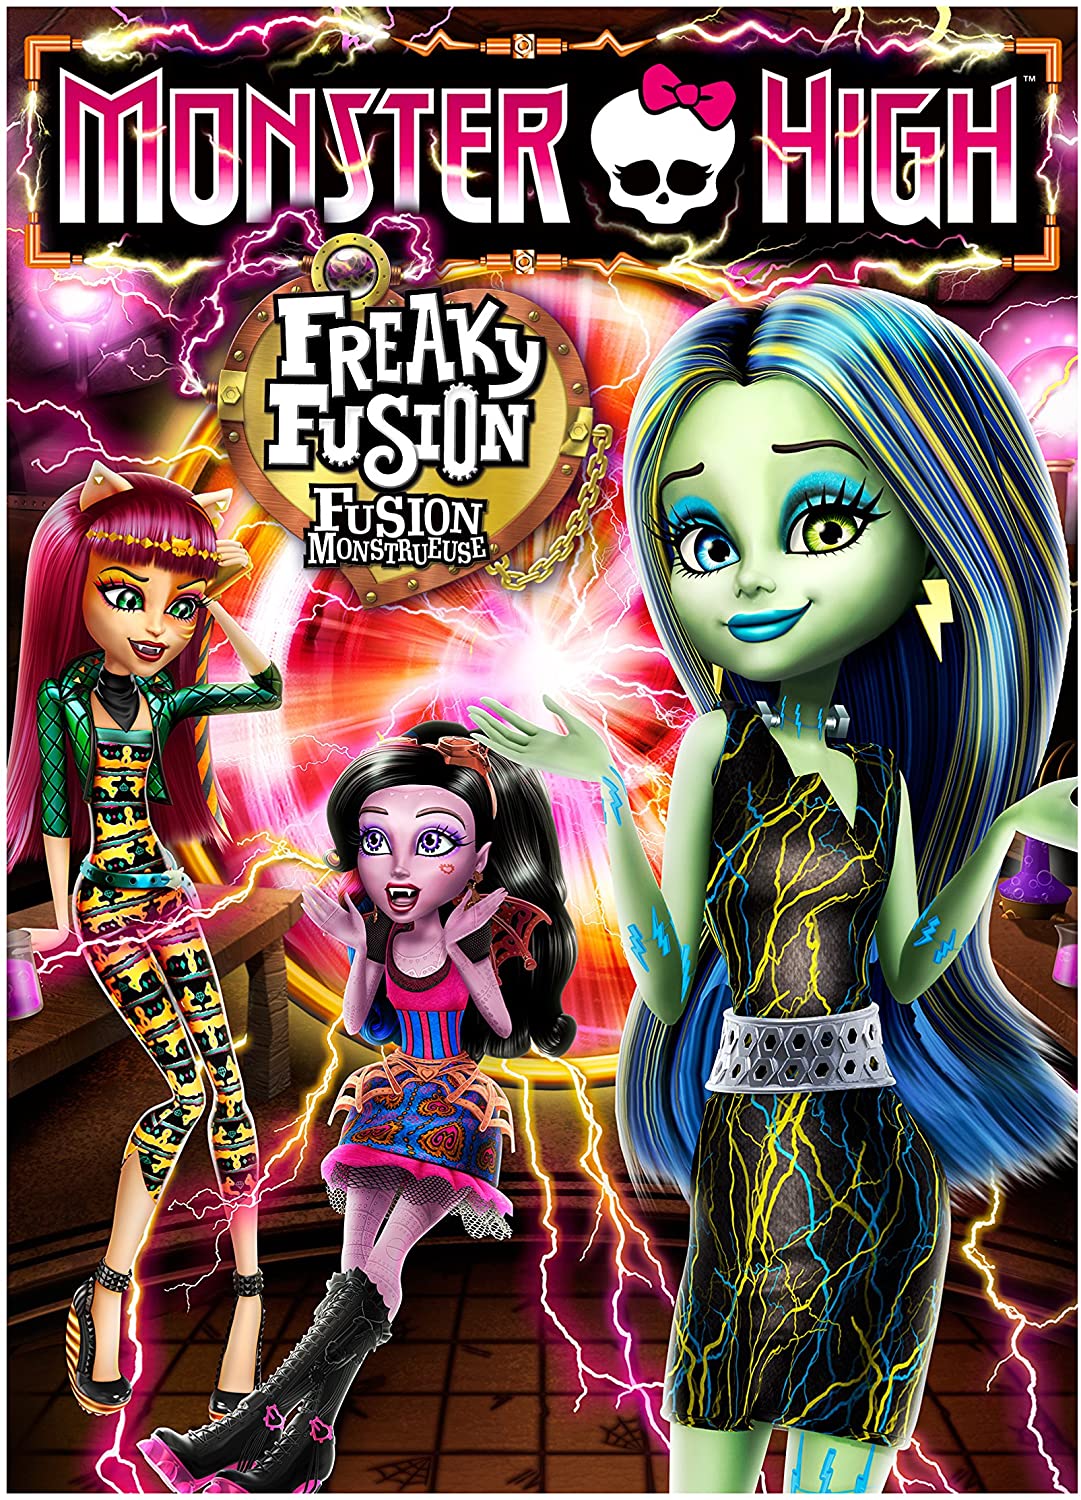 Monster High ( personnages ) TERMINER - Neighthan Rot - Wattpad